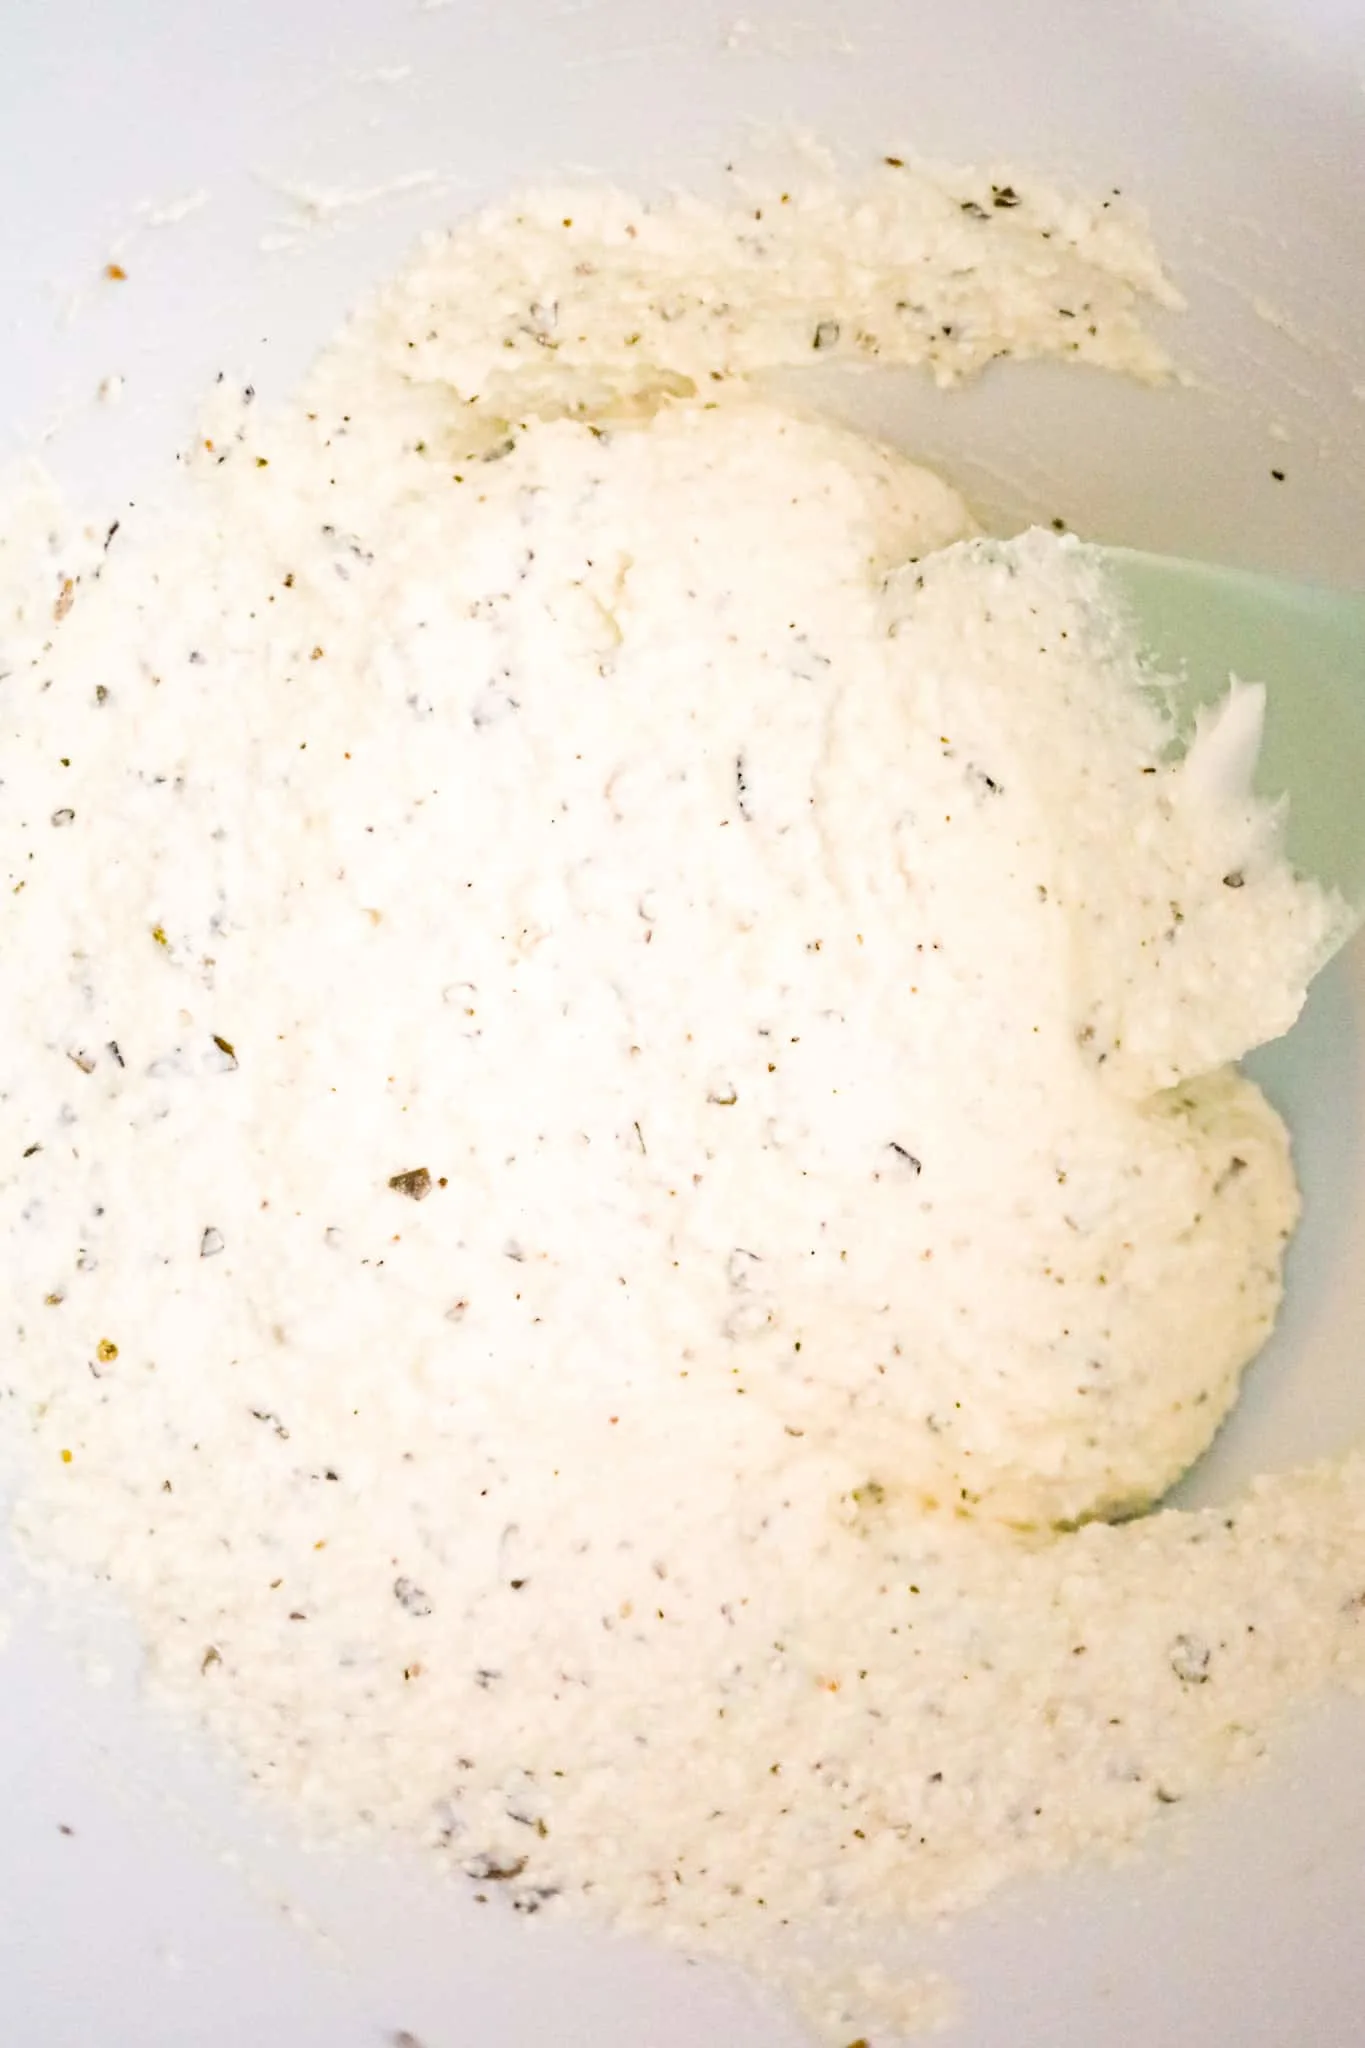 sour cream, ricotta cheese and basil pesto mixture in a mixing bowl